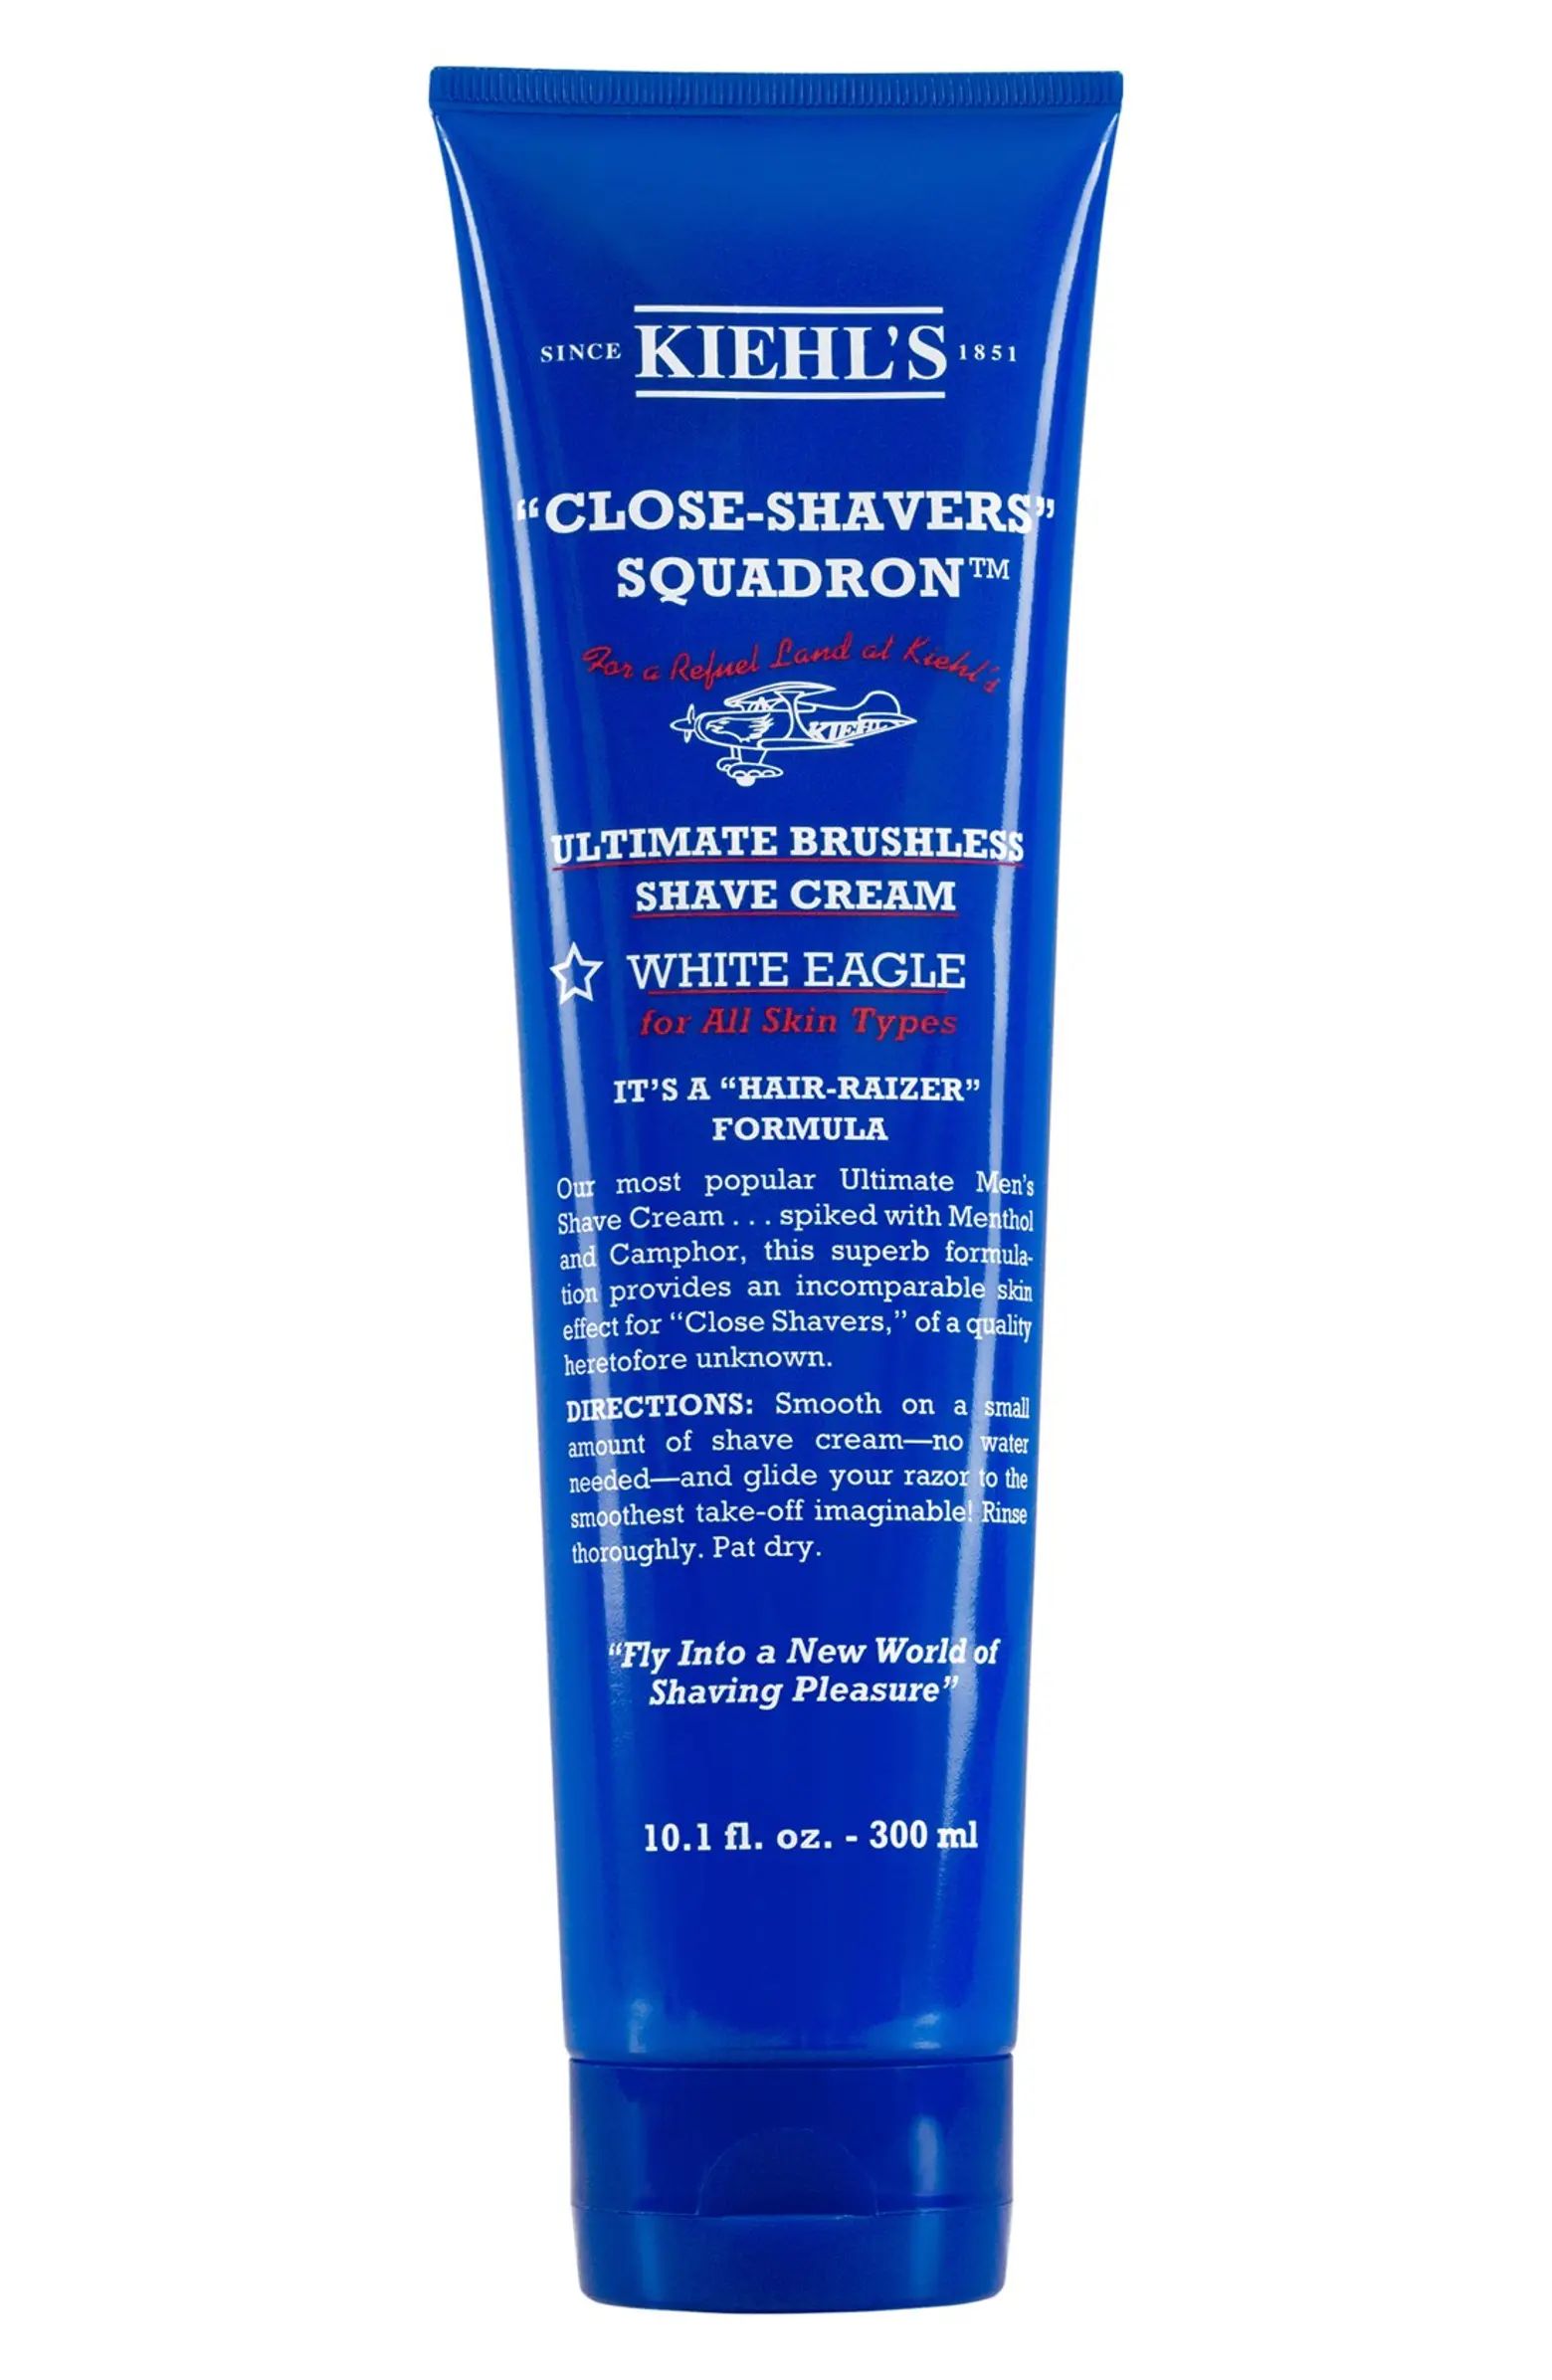 White Eagle Ultimate Brushless Shave Cream | Nordstrom Canada